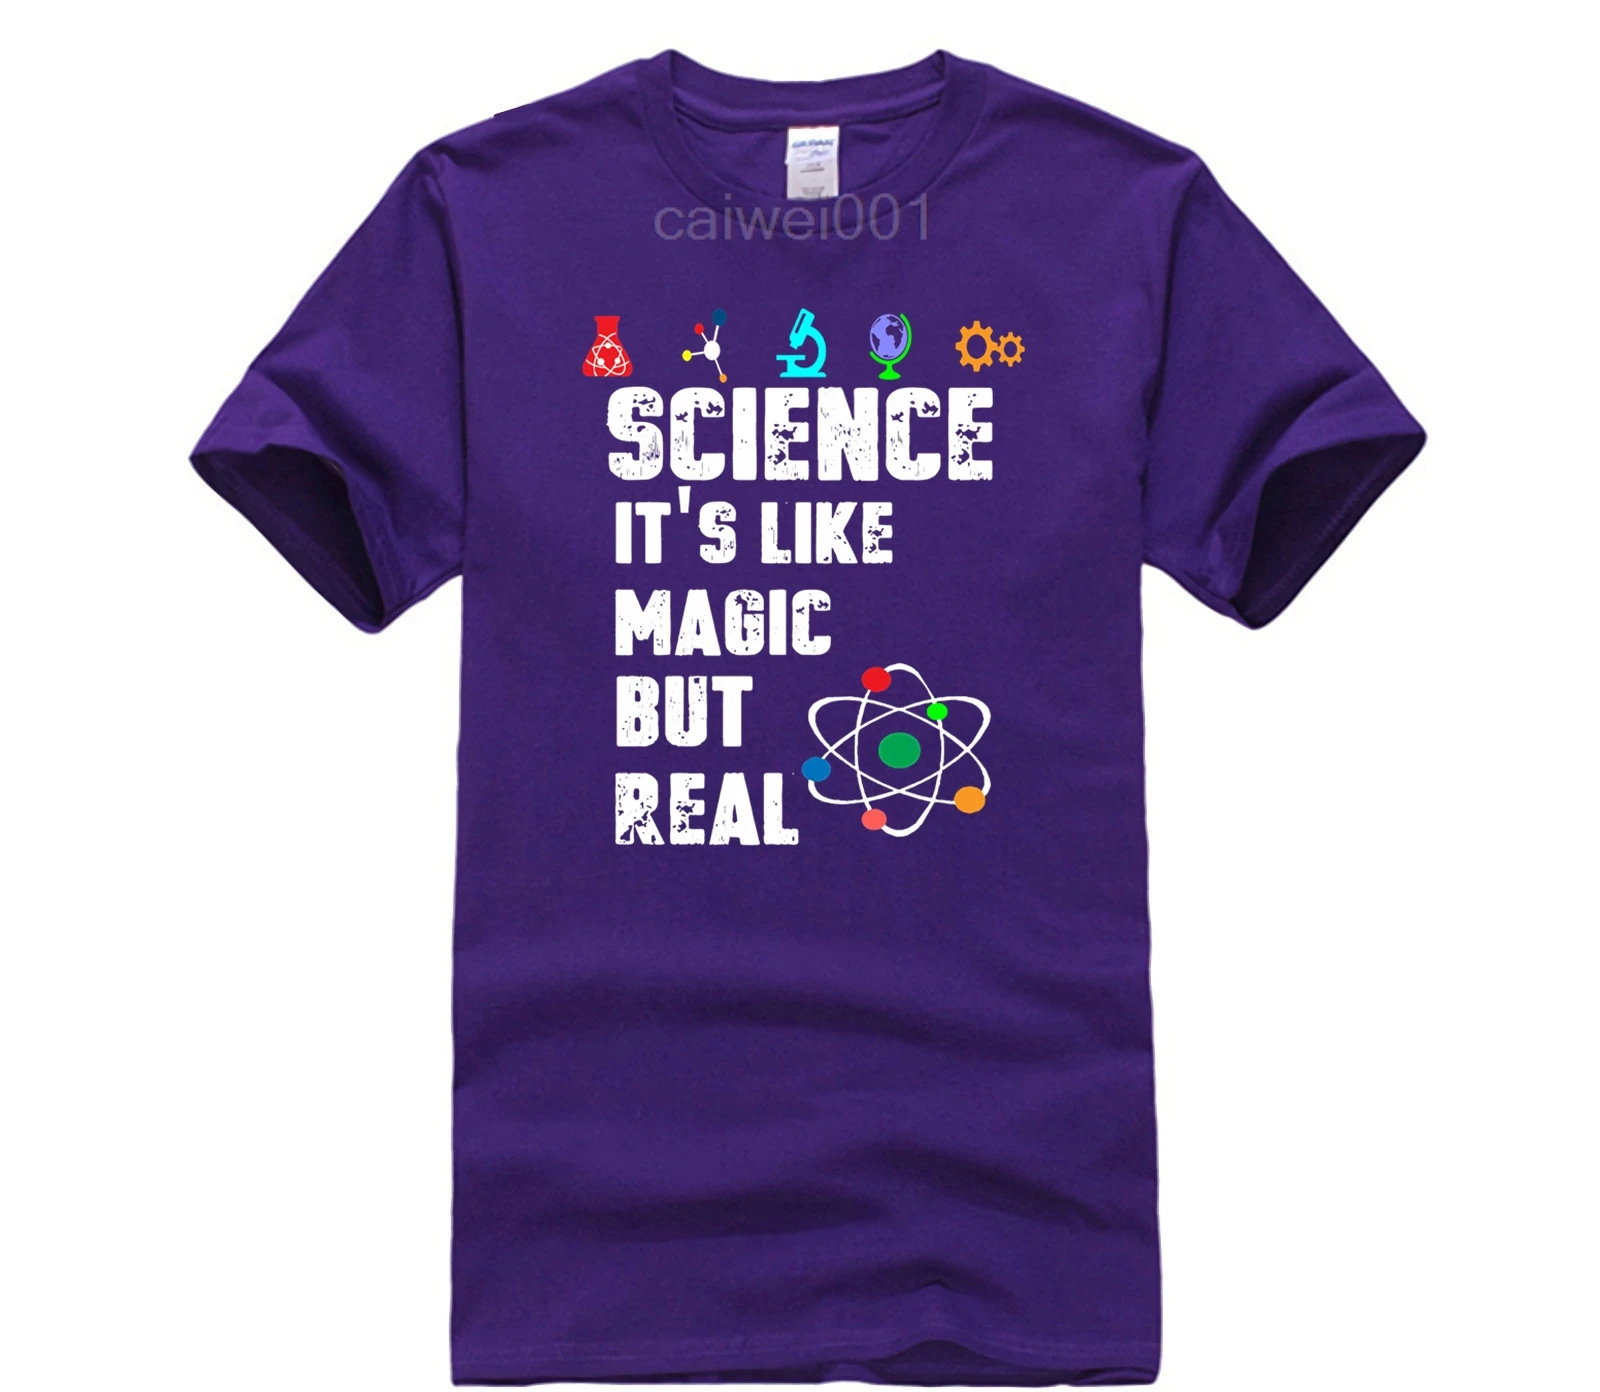 

Fashion T Shirt 100% Cotton SCIENCE IT'S LIKE MAGIC BUT REAL SCIENTIST Newest 2021 Fashion T Shirt Men's Cool